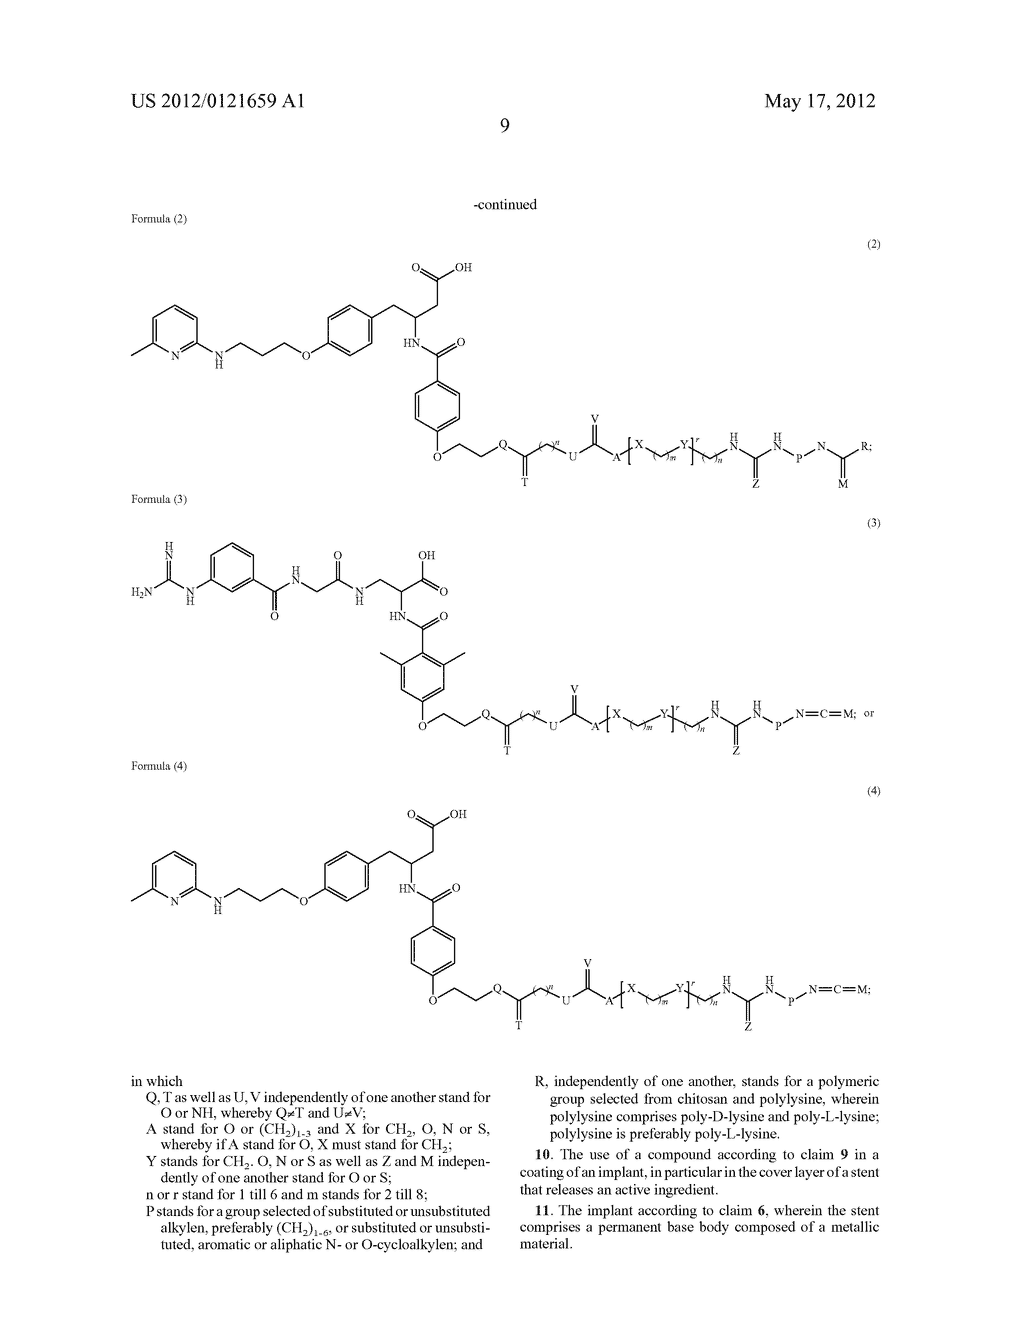 FUNCTIONALIZED RGD PEPTIDOMIMETICS AND THEIR MANUFACTURE, AND IMPLANT     HAVING A COATING CONTAINING SUCH FUNCTIONALIZED RGD PEPTIDOMIMETICS - diagram, schematic, and image 10